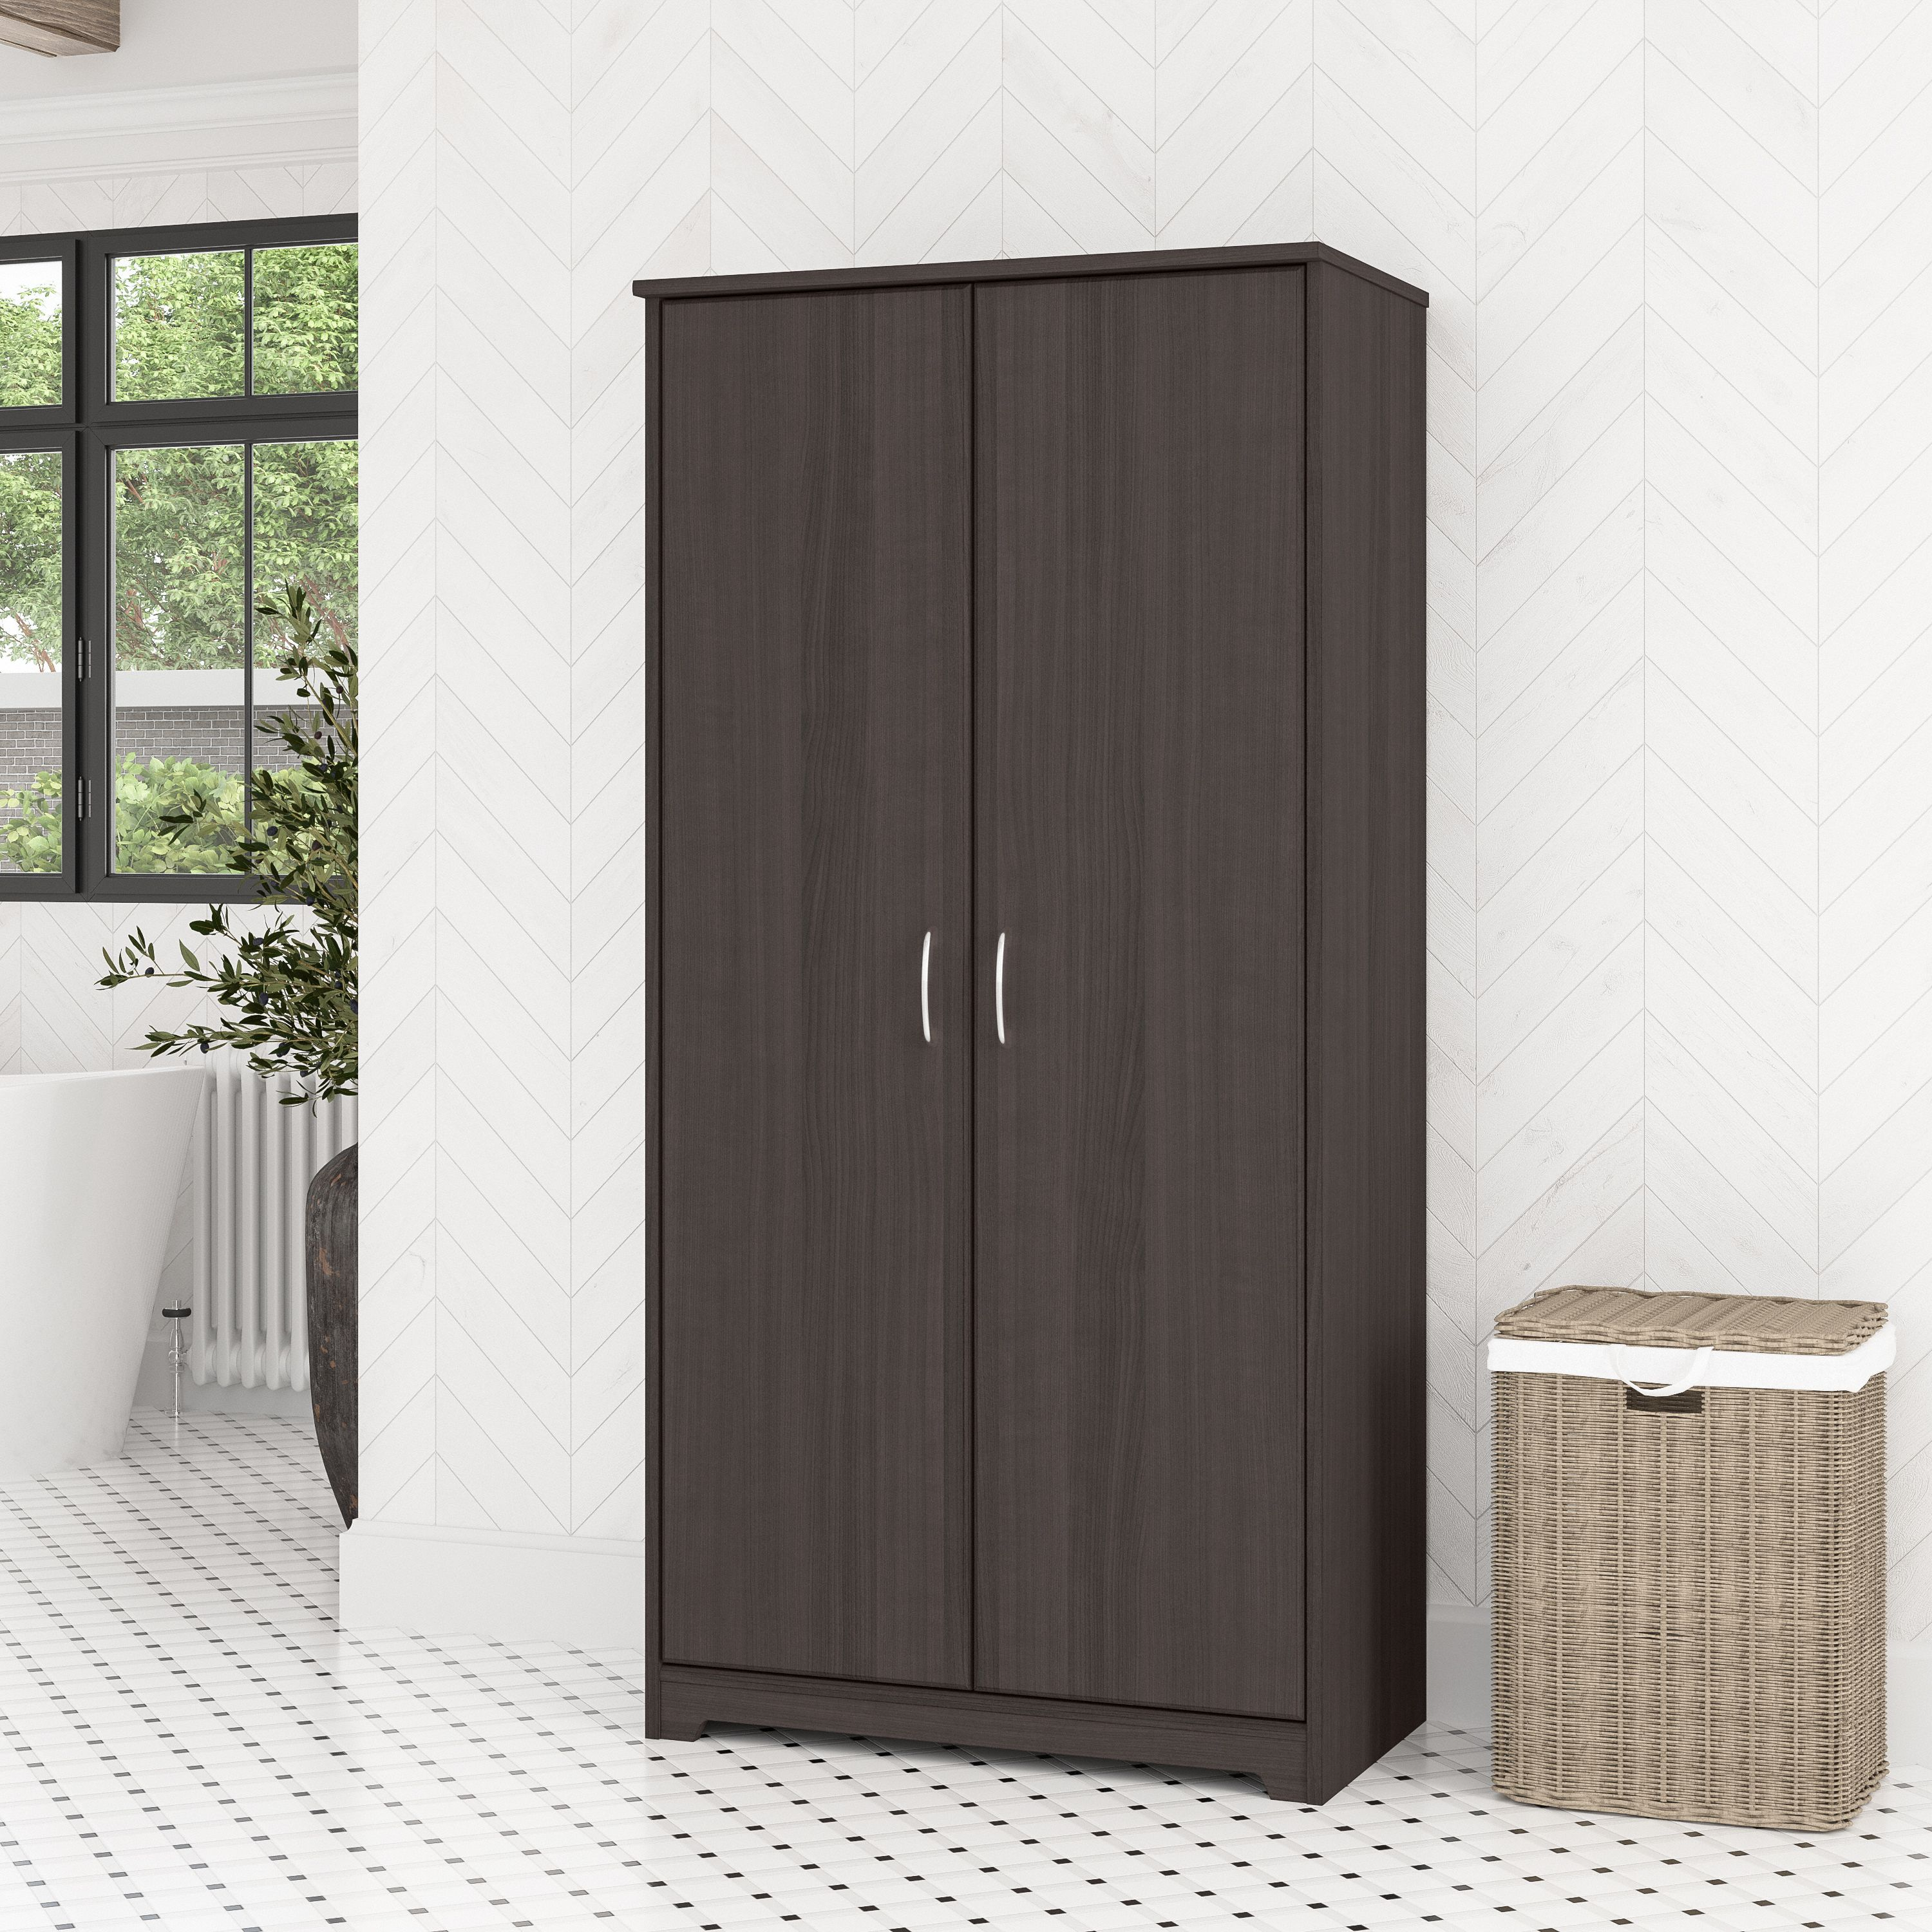 Shop Bush Furniture Cabot Tall Bathroom Storage Cabinet with Doors 01 WC31799-Z1 #color_heather gray